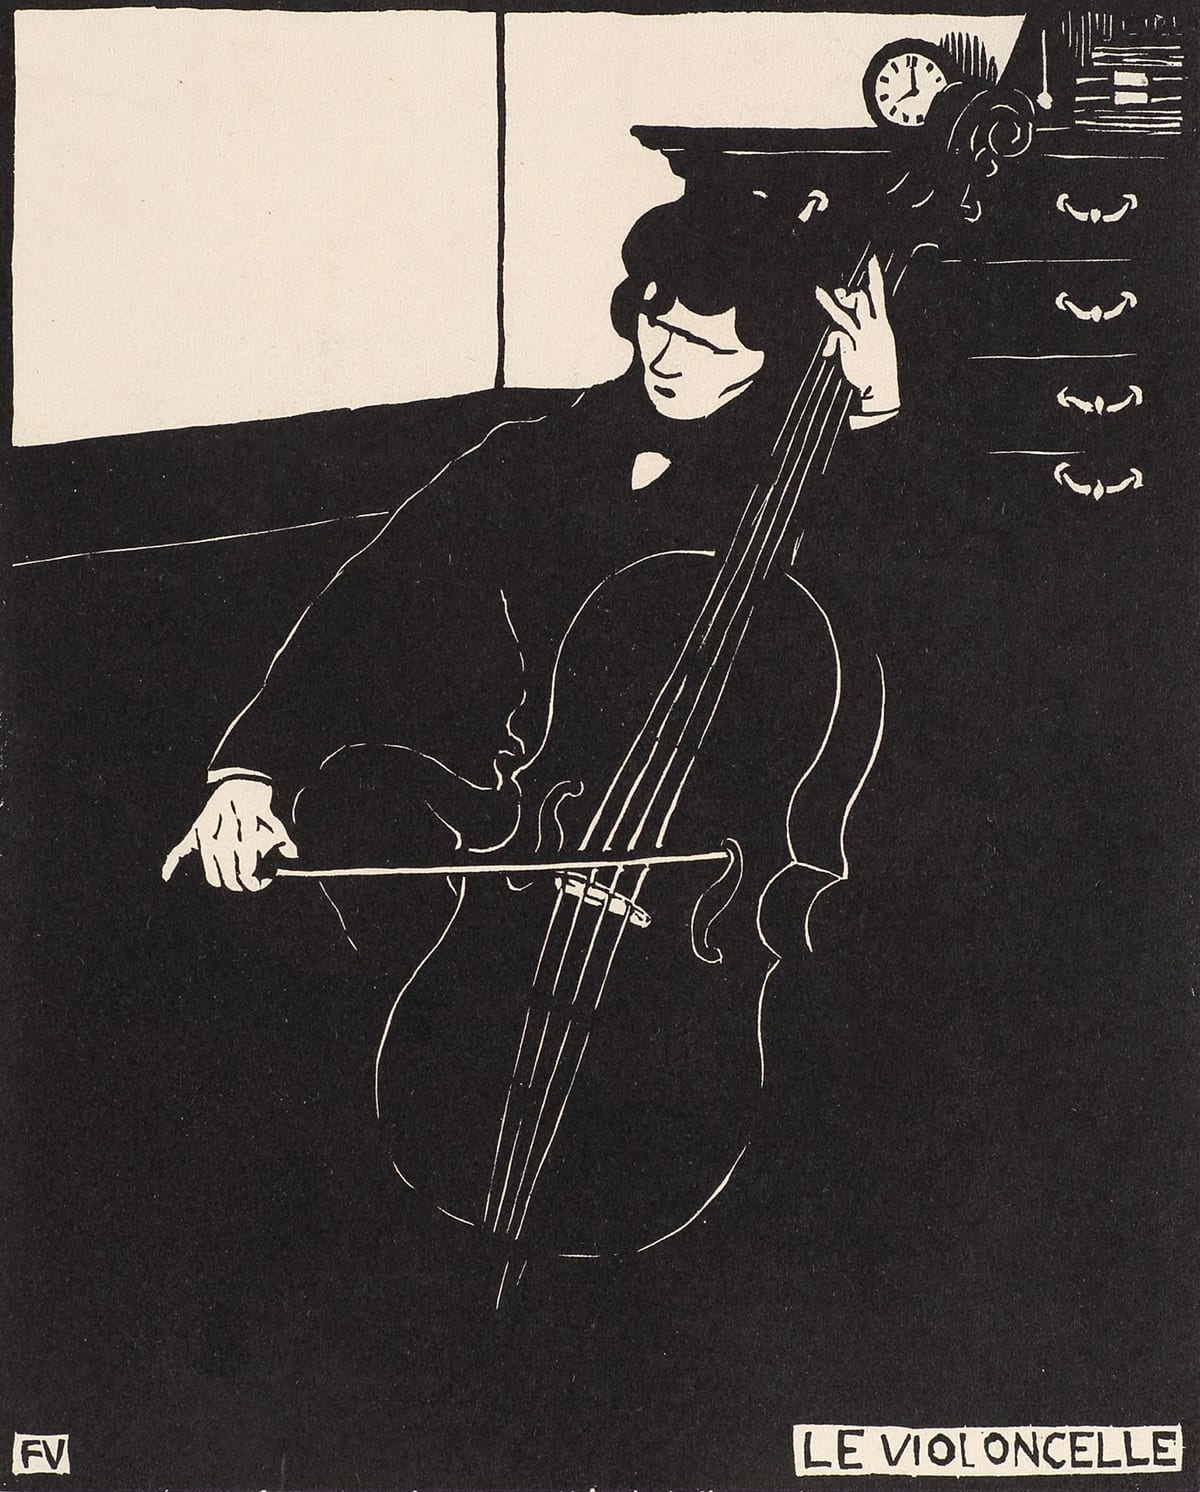 Le Violoncelle (The Cello), Felix Vallotton, 8 13/16 x 7 inches, woodcut on paper. A vertical, rectangular print rendered in black on cream paper depicting a man playing a cello in the corner of a room. Most of this print is black with the man’s face, hands, details of his coat, cello, a portion of a wall and the contents of the room in cream. The man sits at center, drawing a bow across the cello in front of a chest of drawers near a corner of the room. His hair, coat and cello are black with delicate lines in cream showing details of the cello and man. Behind him are a chest of drawers, again in black with cream lines showing the chest’s detail and handles. A small round clock sits on the chest. The corner wall behind the man is divided into a lower half in black and the upper half in cream. Much of the print is black with the black letters “FV” in a cream box at the lower left corner and “Le Violoncelle” at lower right, also in black letters on cream.